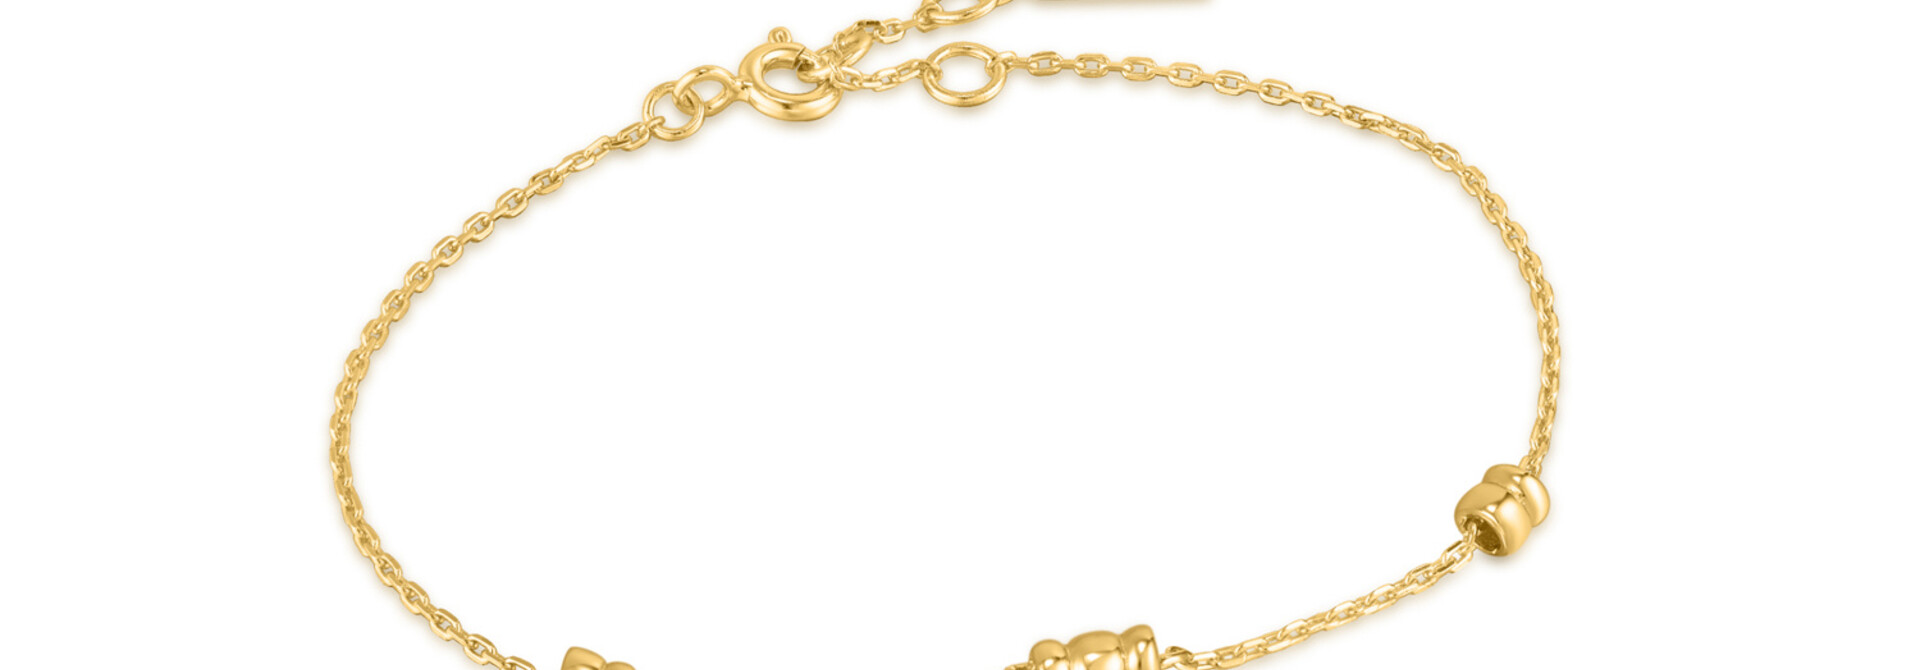 Smooth Twist Chain Armband - Gold plated